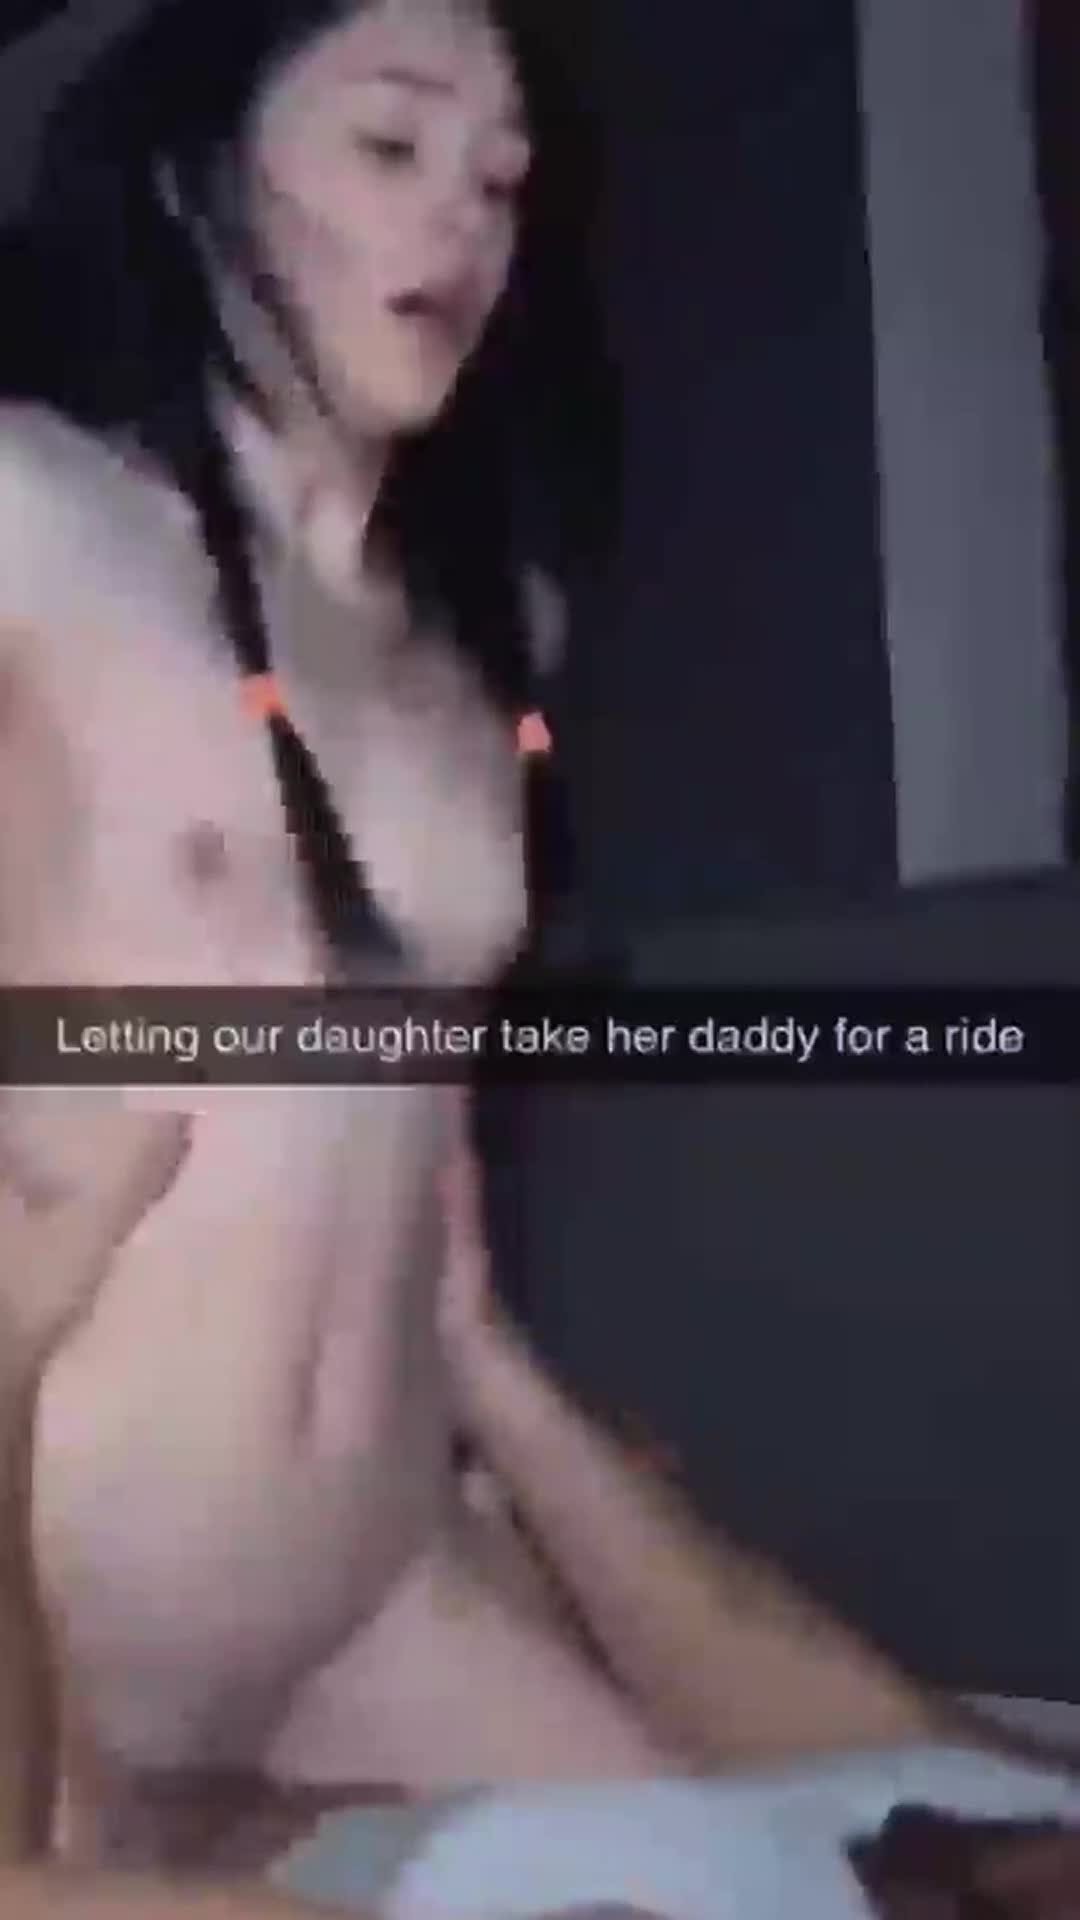 Taking her daddy for a ride